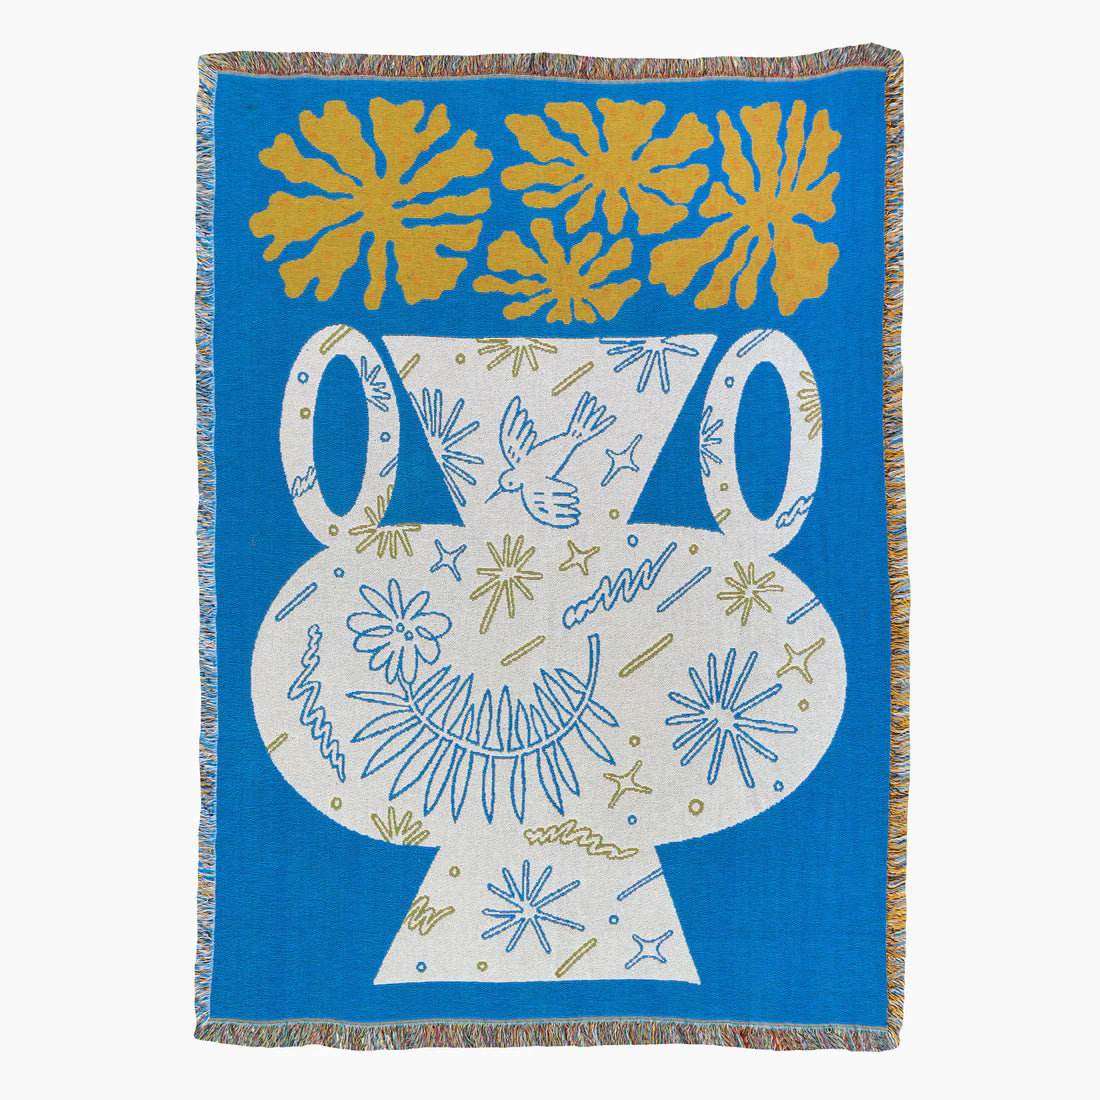 Blue, white and yellow tapestry blanket depicting a white vase and yellow flowers